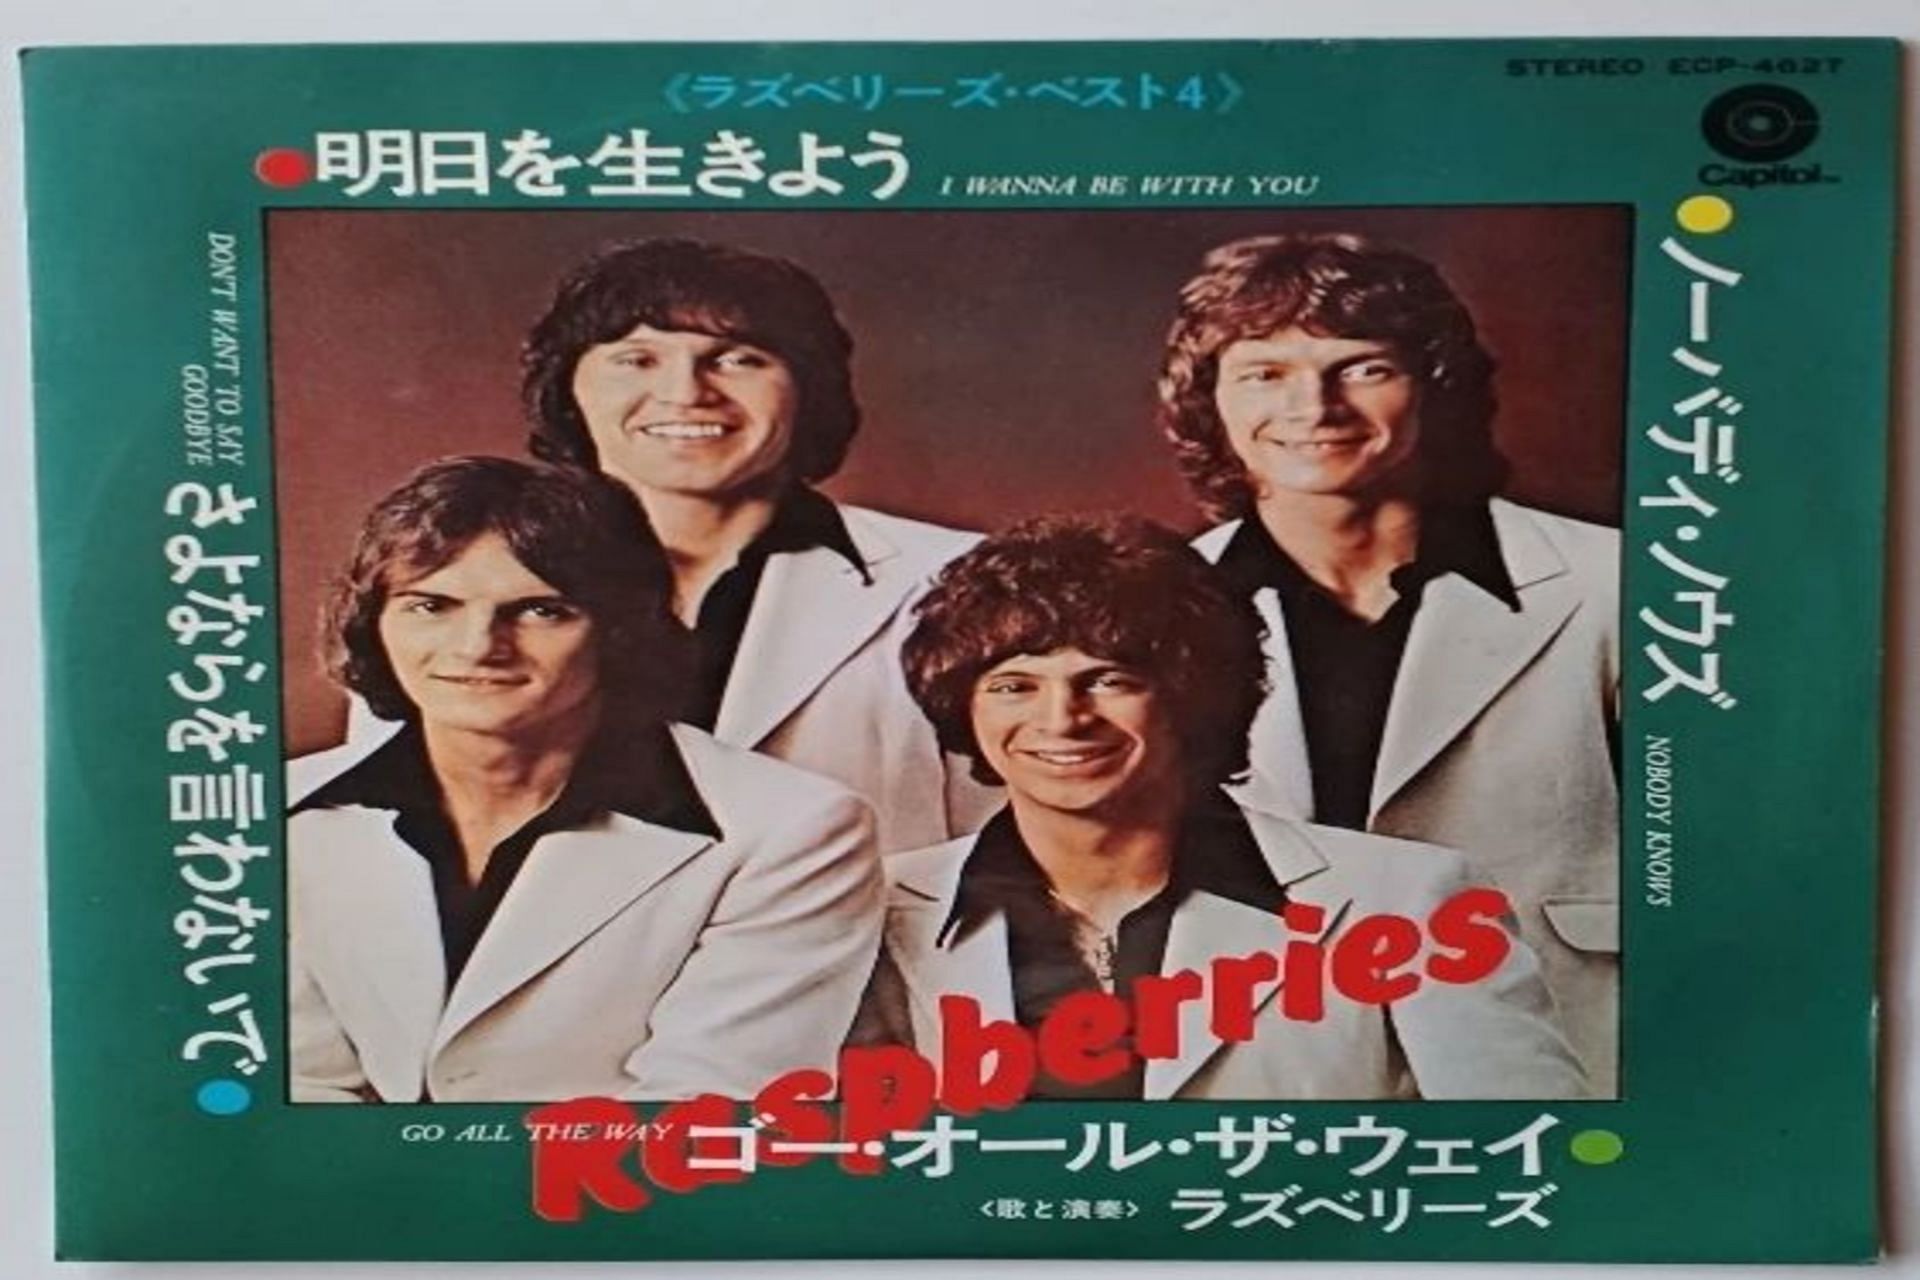 Eric with these Raspberries band members (Image by pinknarida/Instagram)